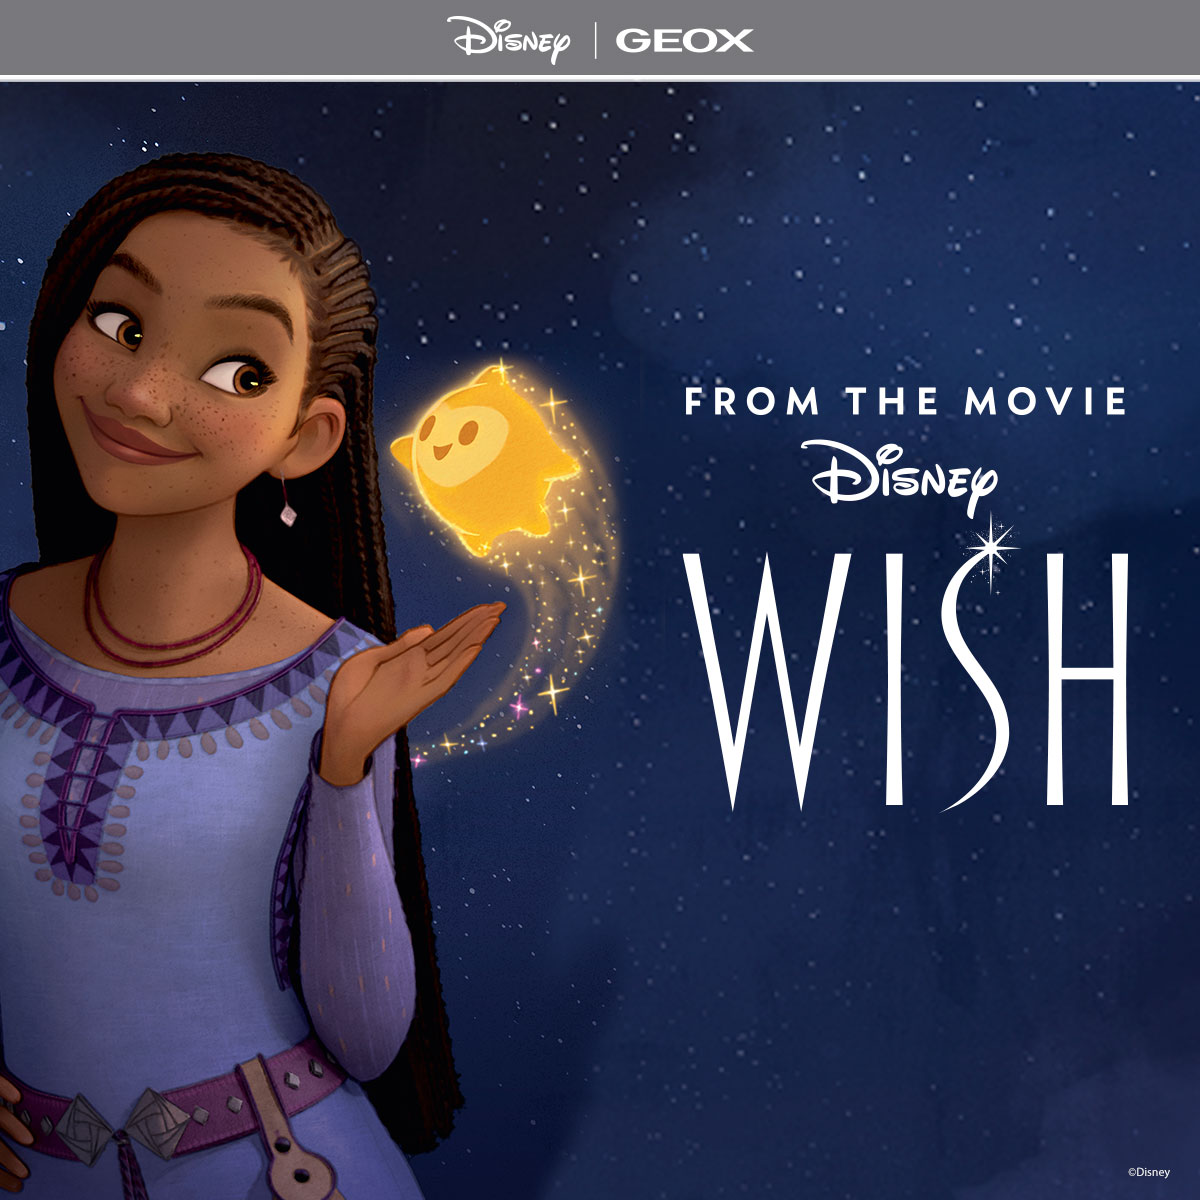 Geox®  Disney Wish collection inspired by the Disney film